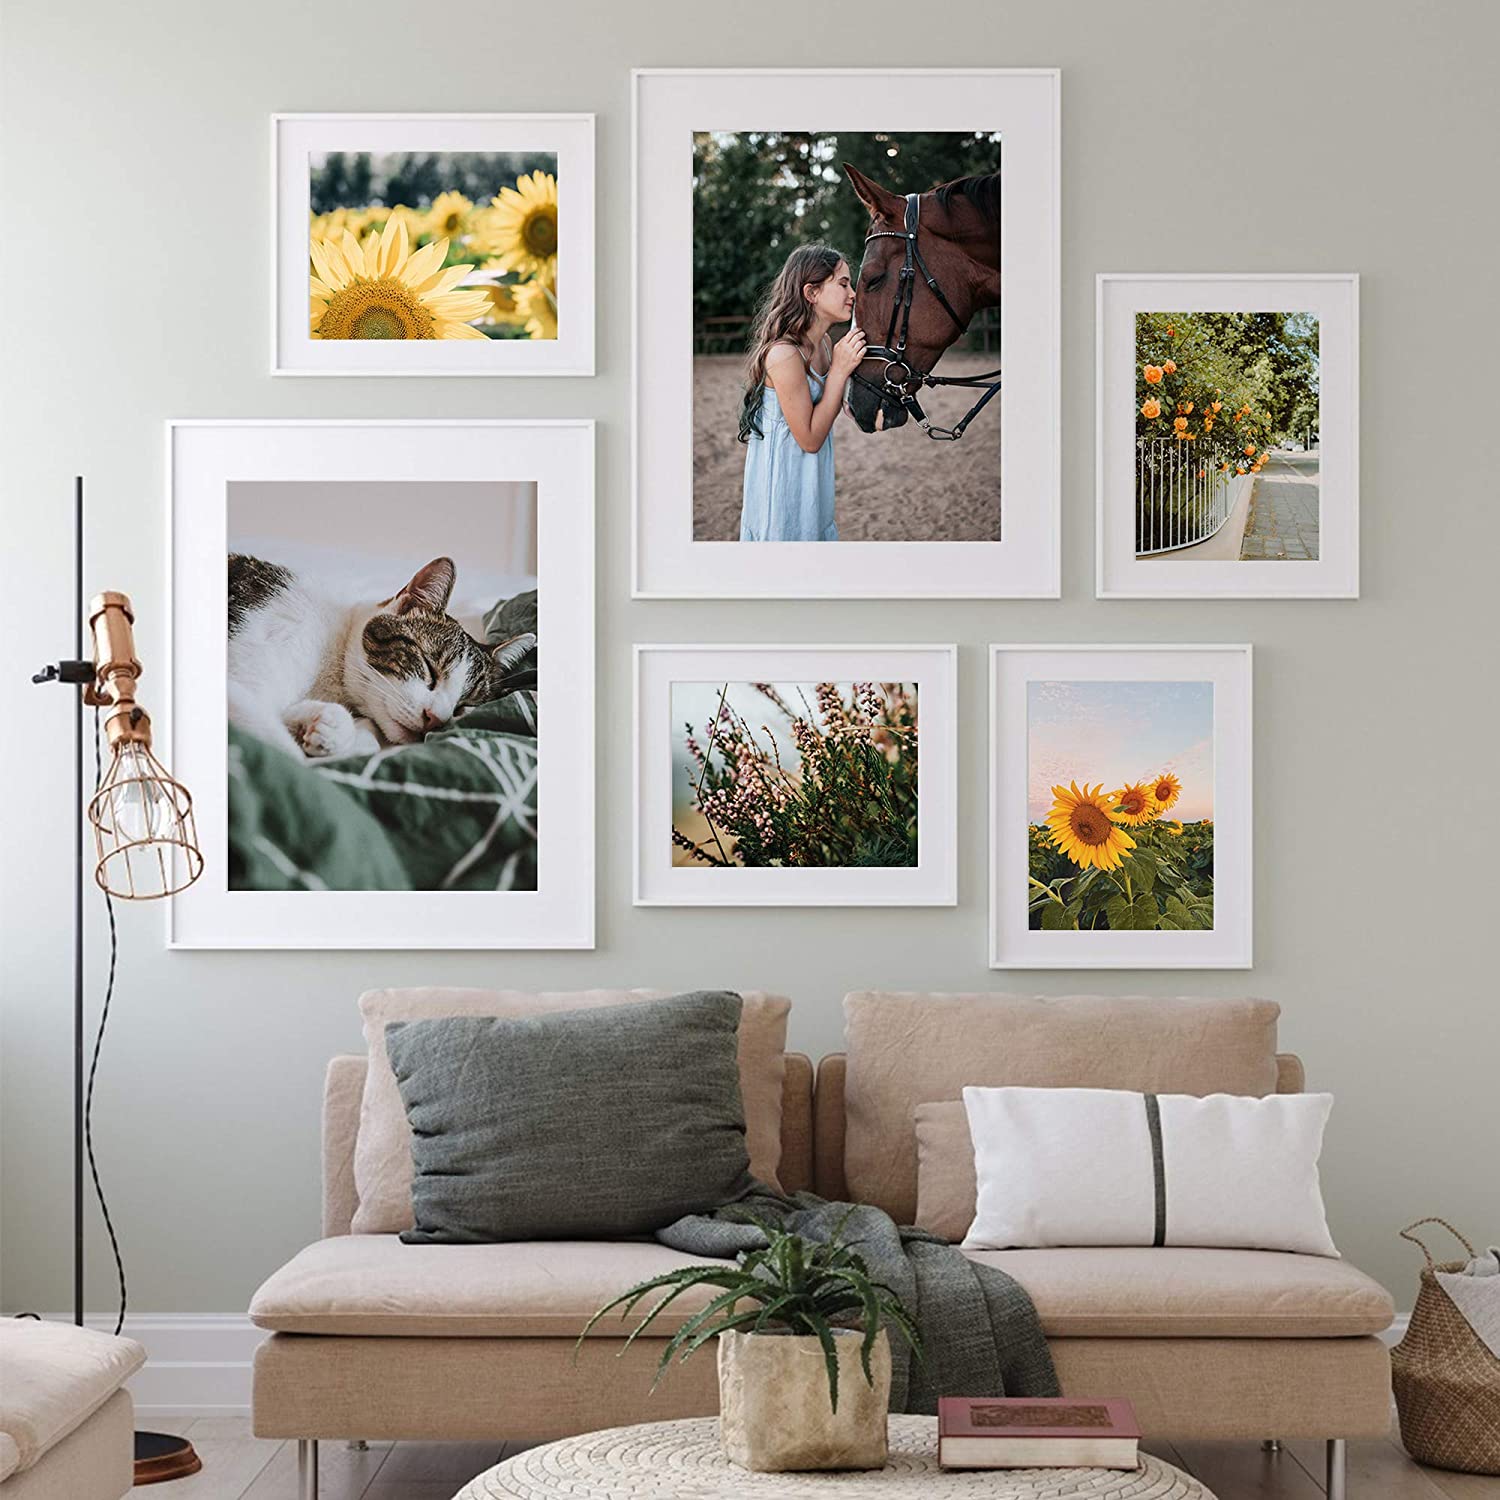 Sindcom 16x20 Poster Frame 3 Pack, Picture Frames with Detachable Mat for  11x14 Prints, Horizontal and Vertical Hanging Hooks for Wall Mounting